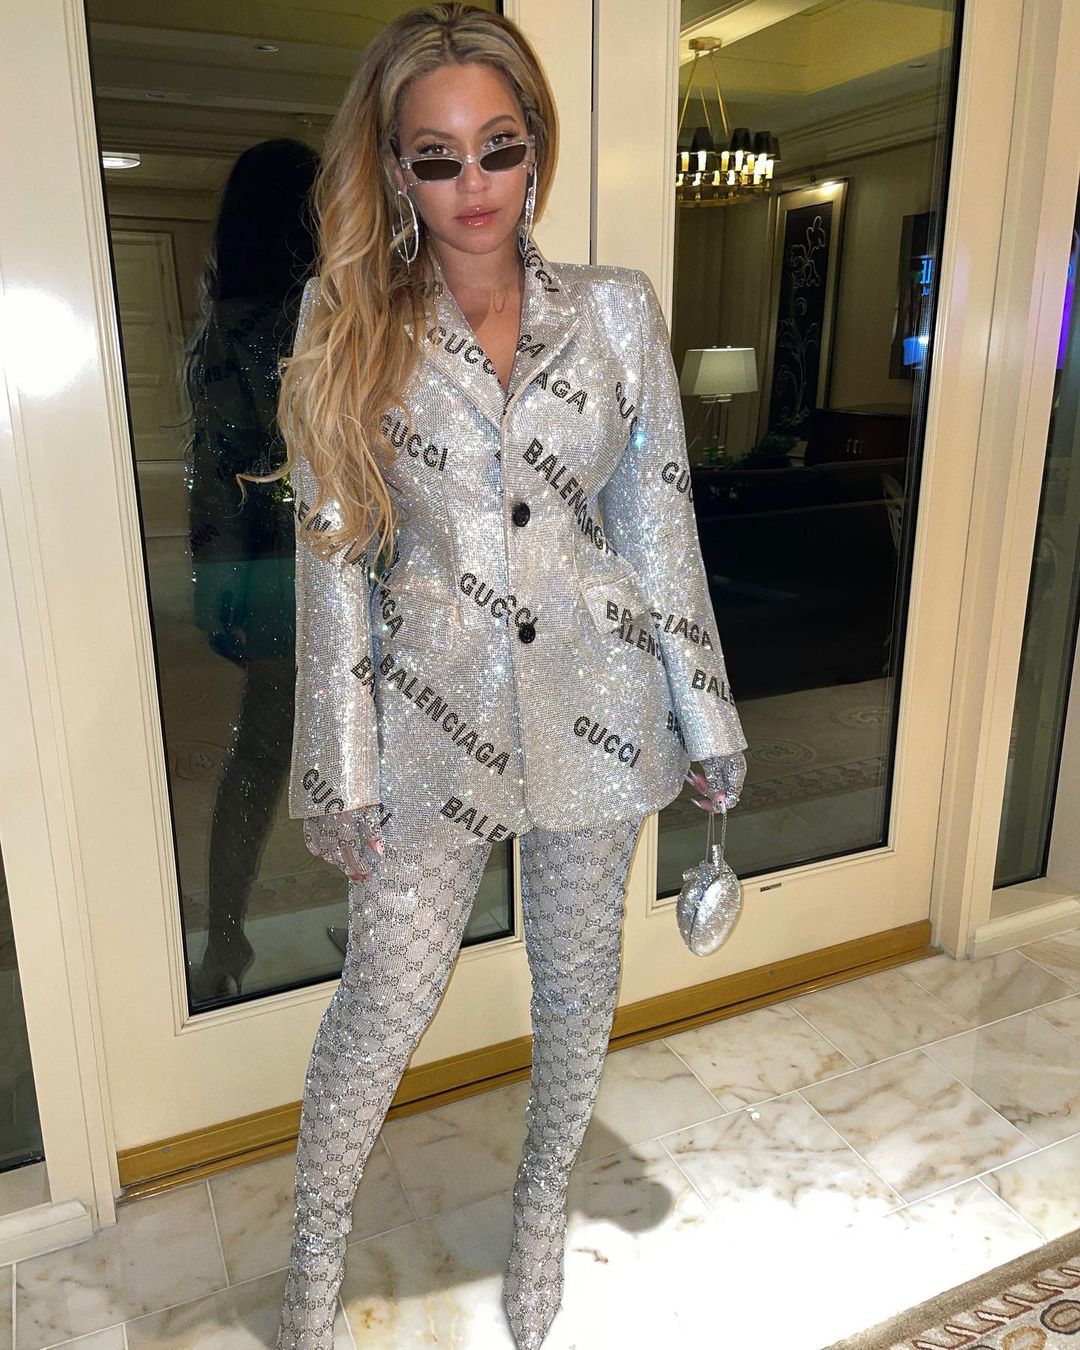 beyonce-in-balenciaga-x-gucci-suit-jay-zs-birthday-party-in-las-vegas